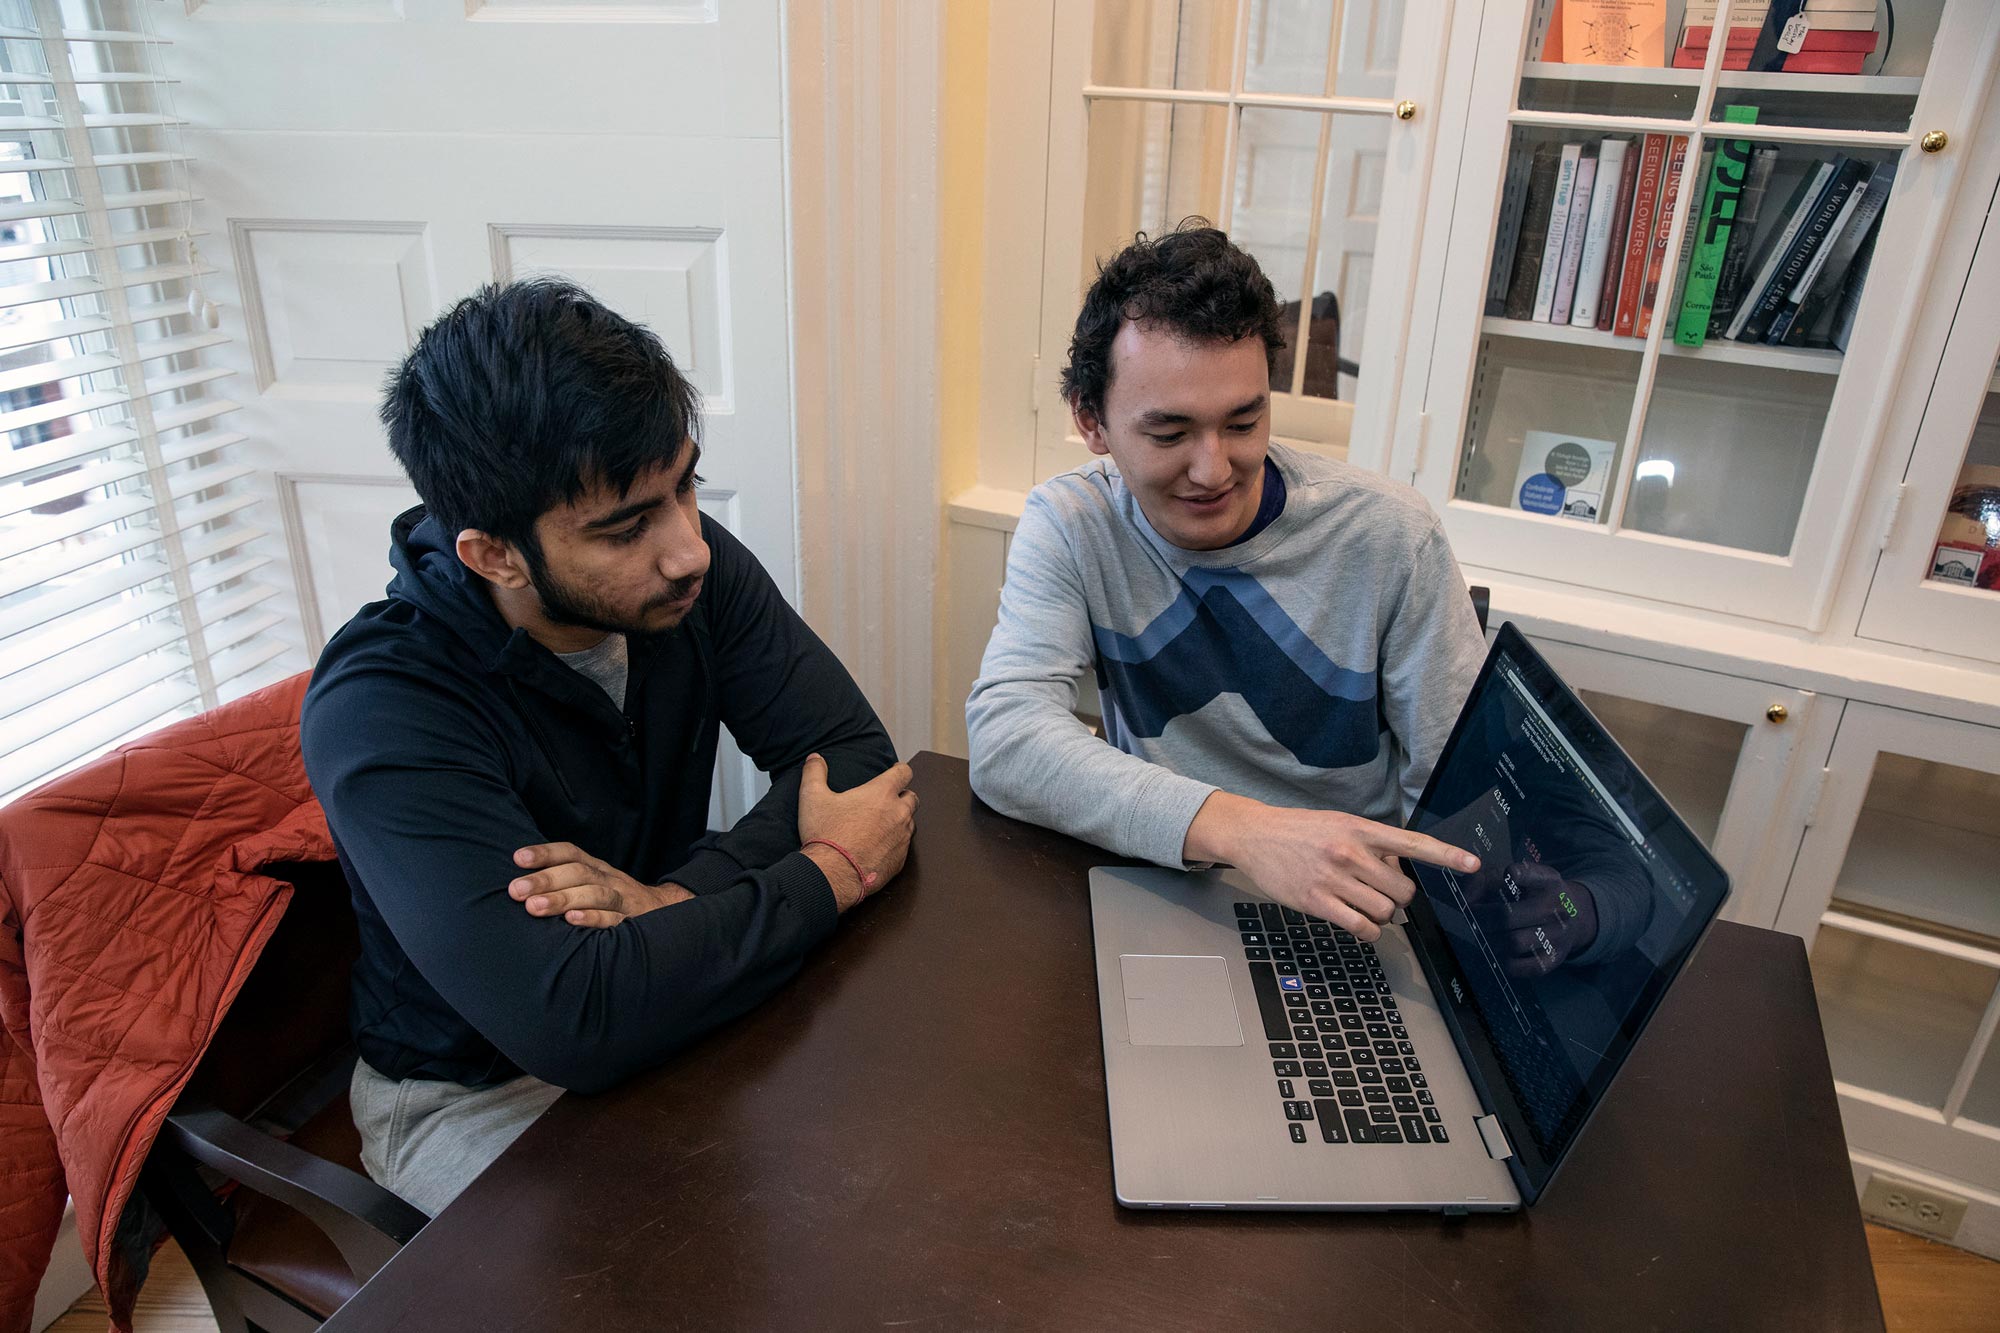 James Yun and Soukarya Ghosh sit at a table together and look at a laptop